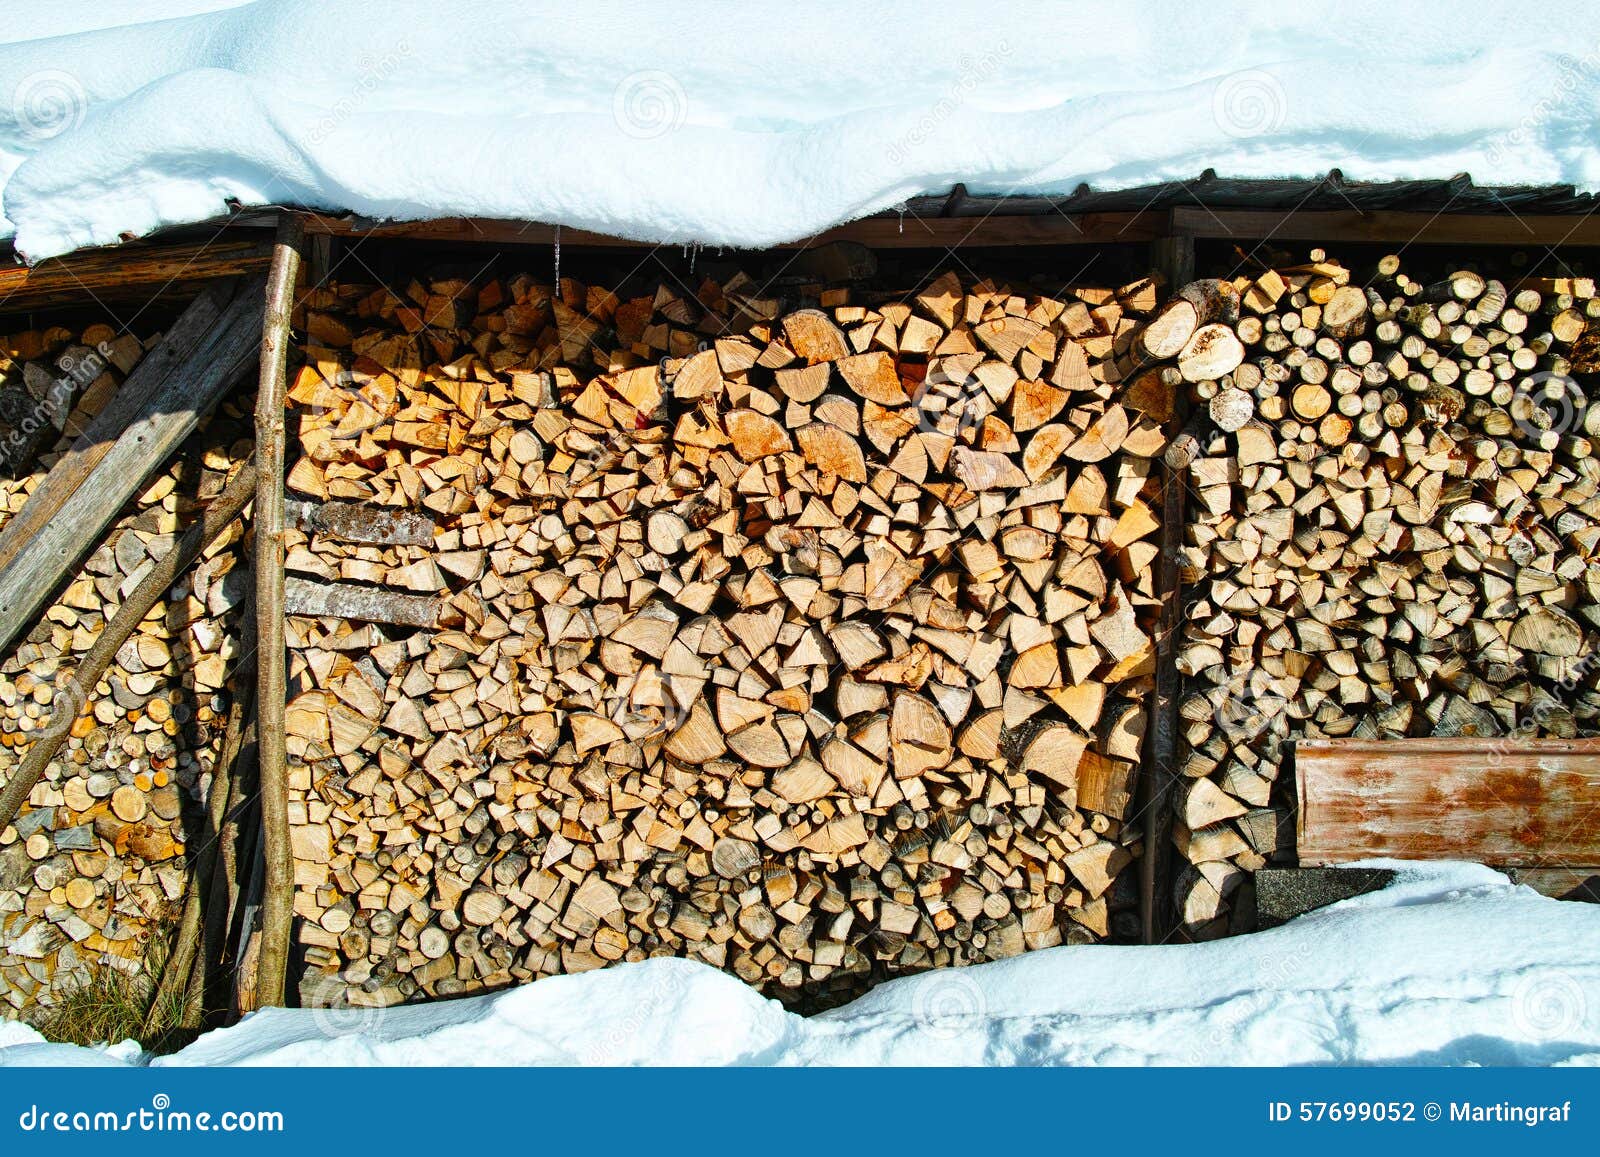 Wood Pile Storage In Winter Stock Photo - Image: 57699052